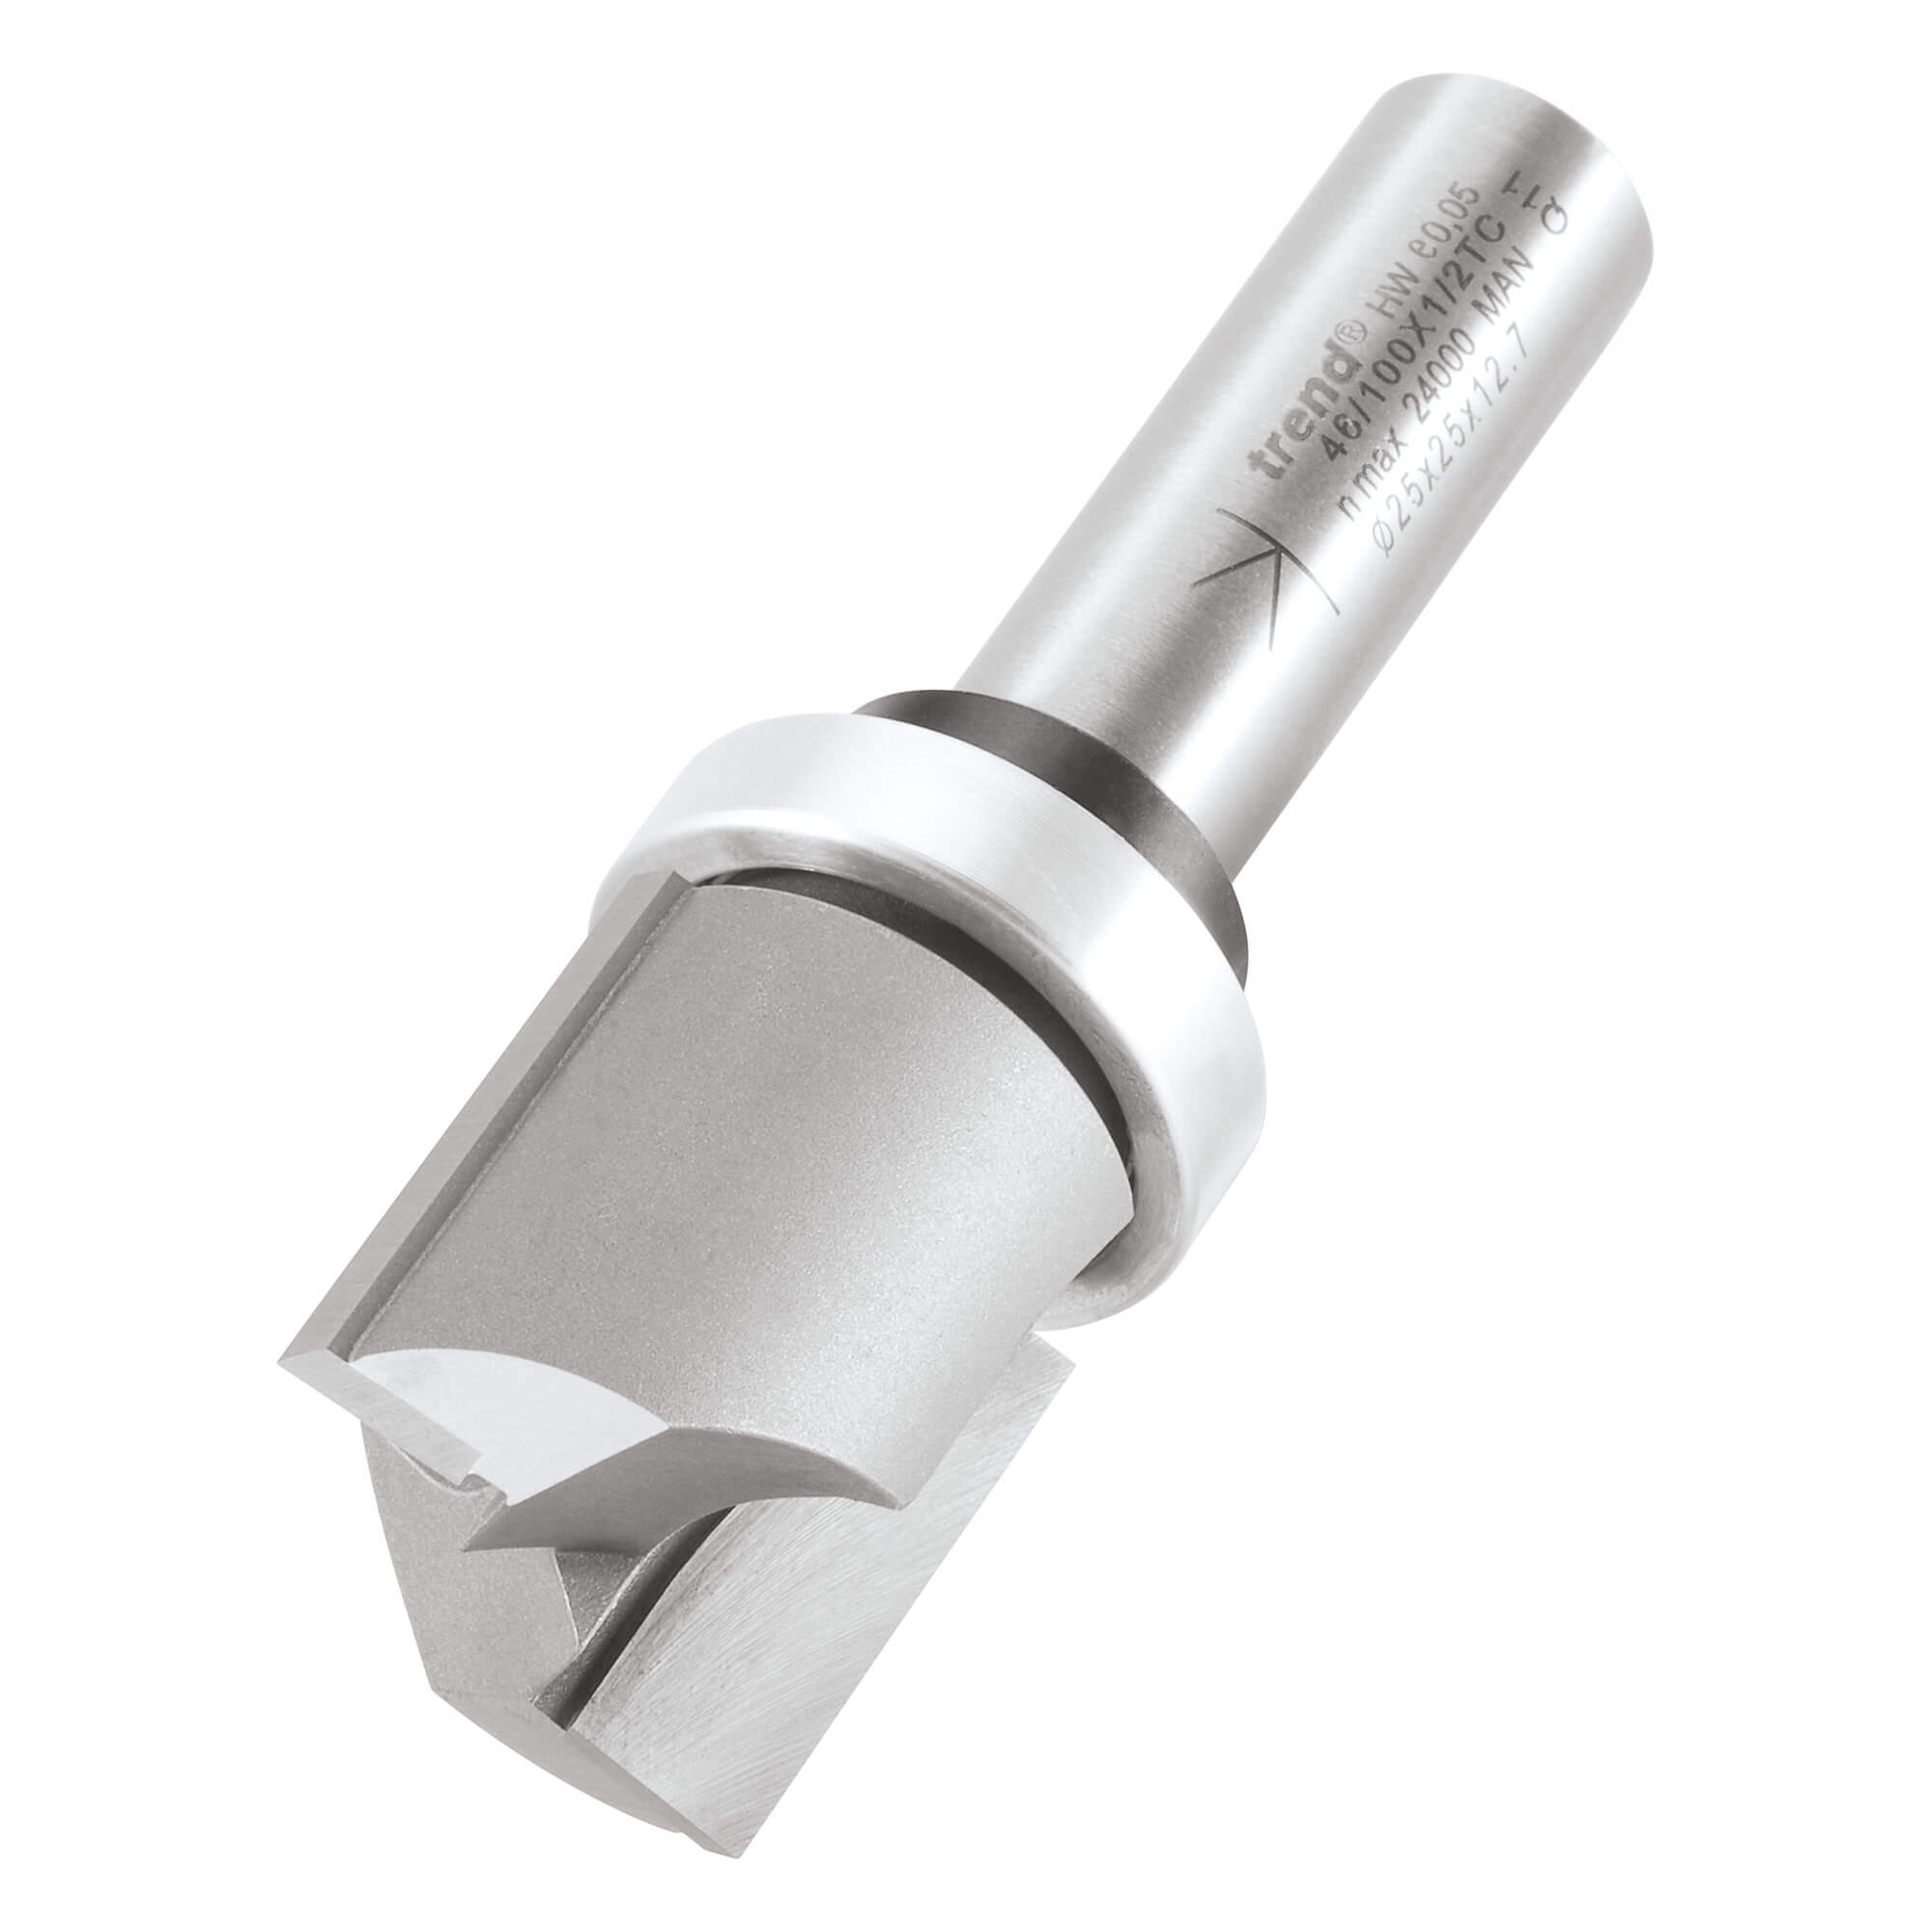 Image of Trend Bearing Guided Template Profiler Router Cutter 25mm 25mm 1/2"